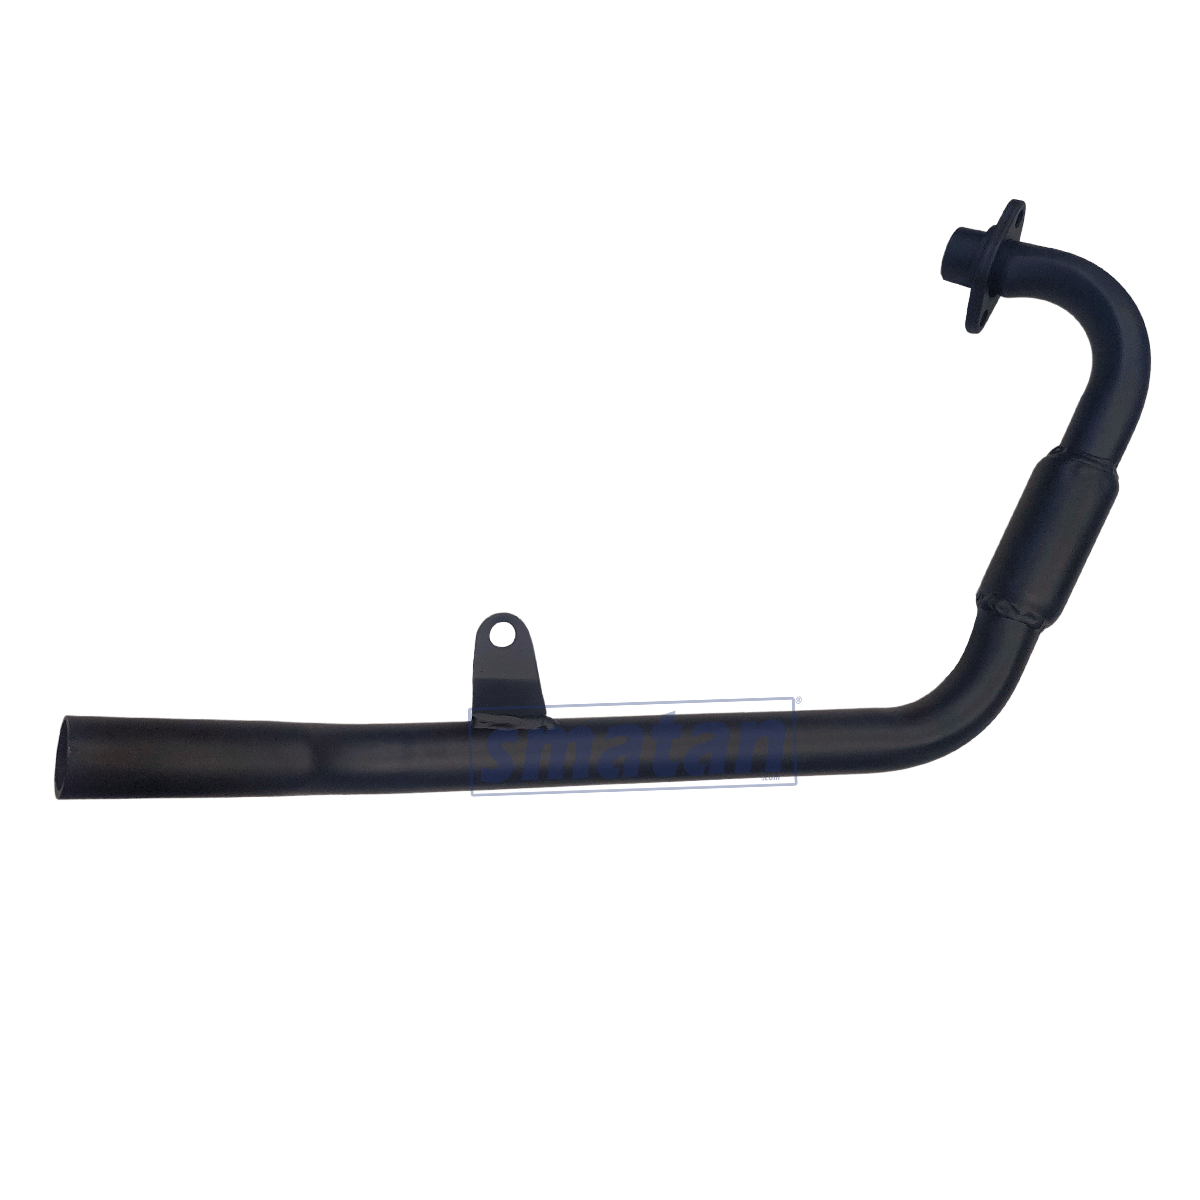 SMATAN Exhaust System Bend Pipe Silencers Pipe for Motorcycle